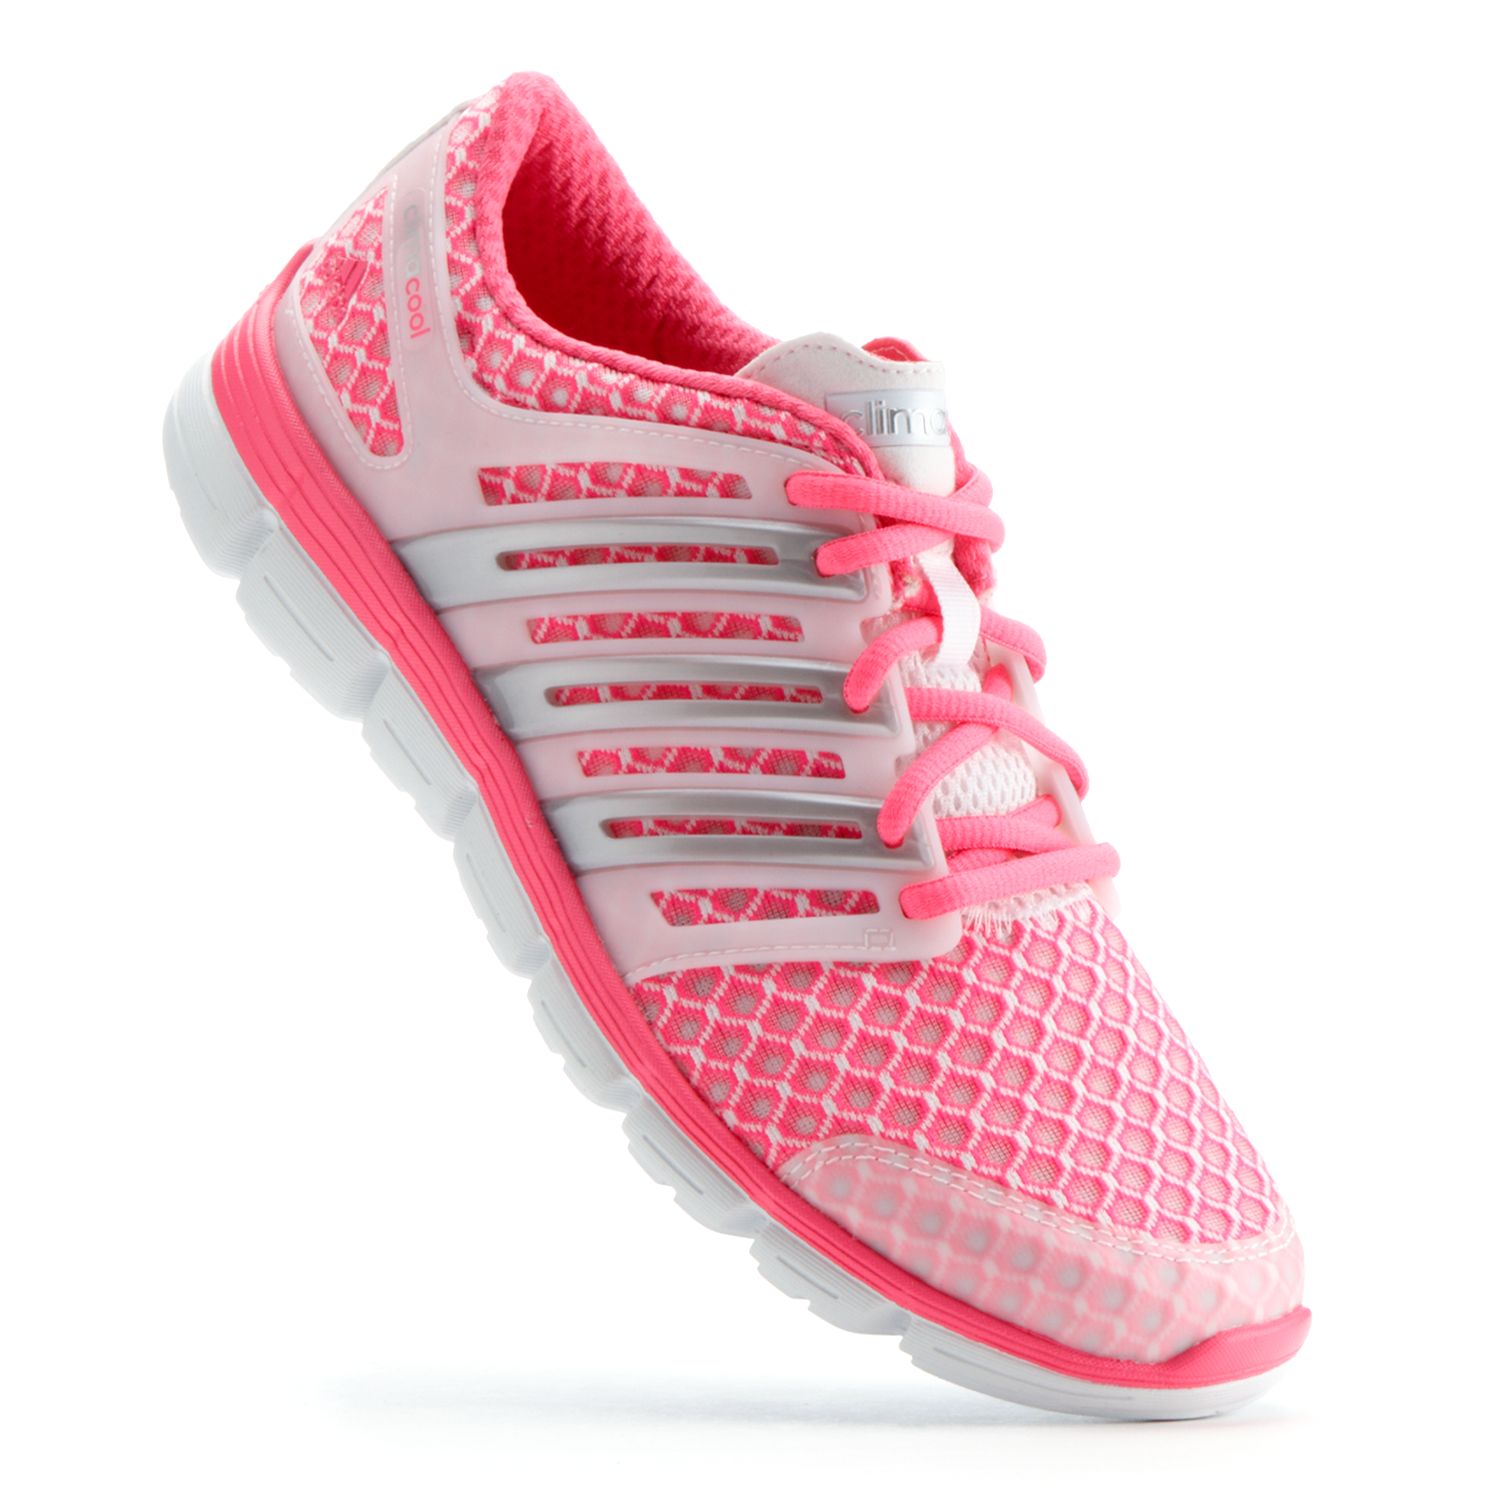 adidas climacool sneakers womens